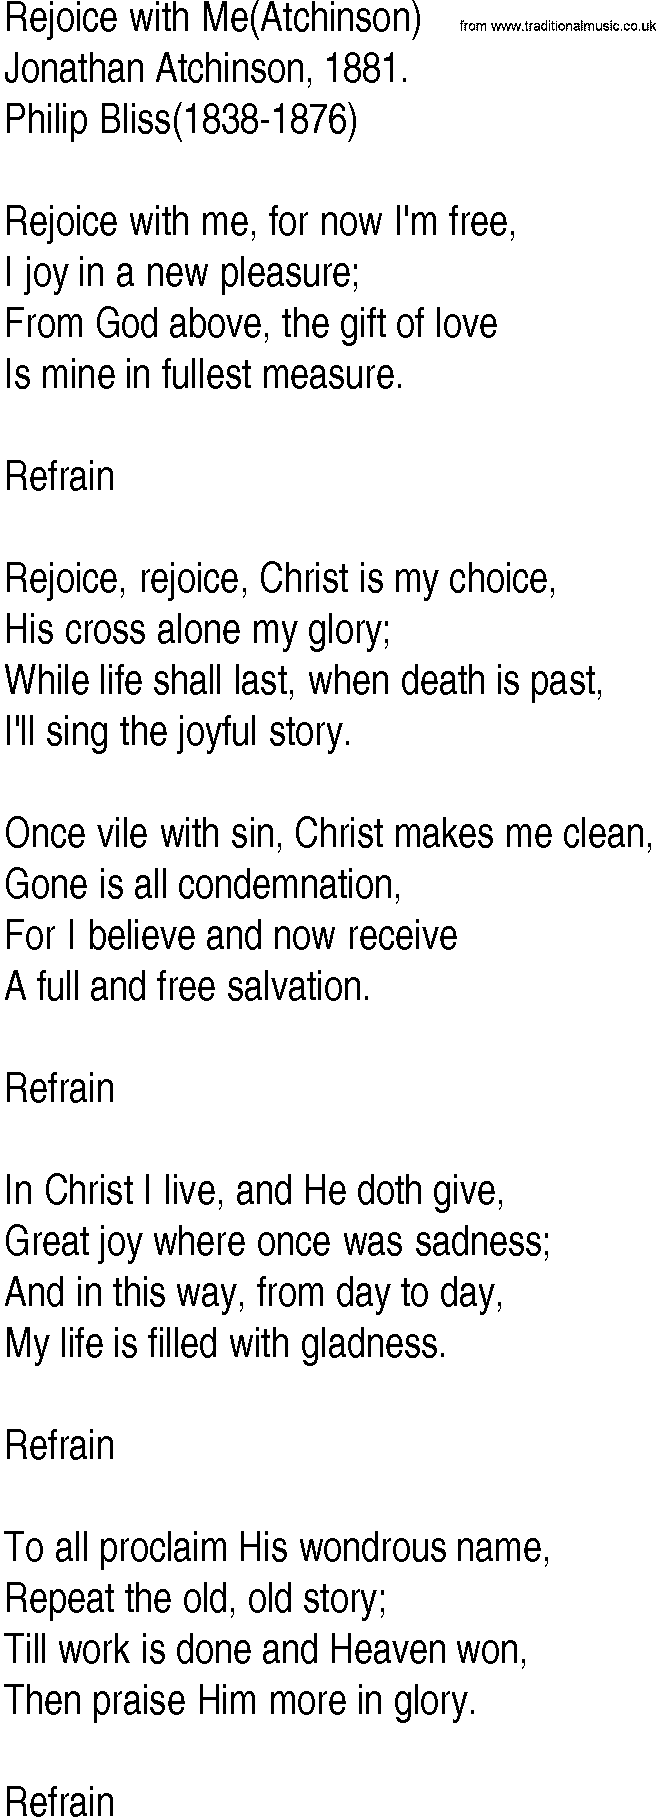 Hymn and Gospel Song: Rejoice with Me(Atchinson) by Jonathan Atchinson lyrics